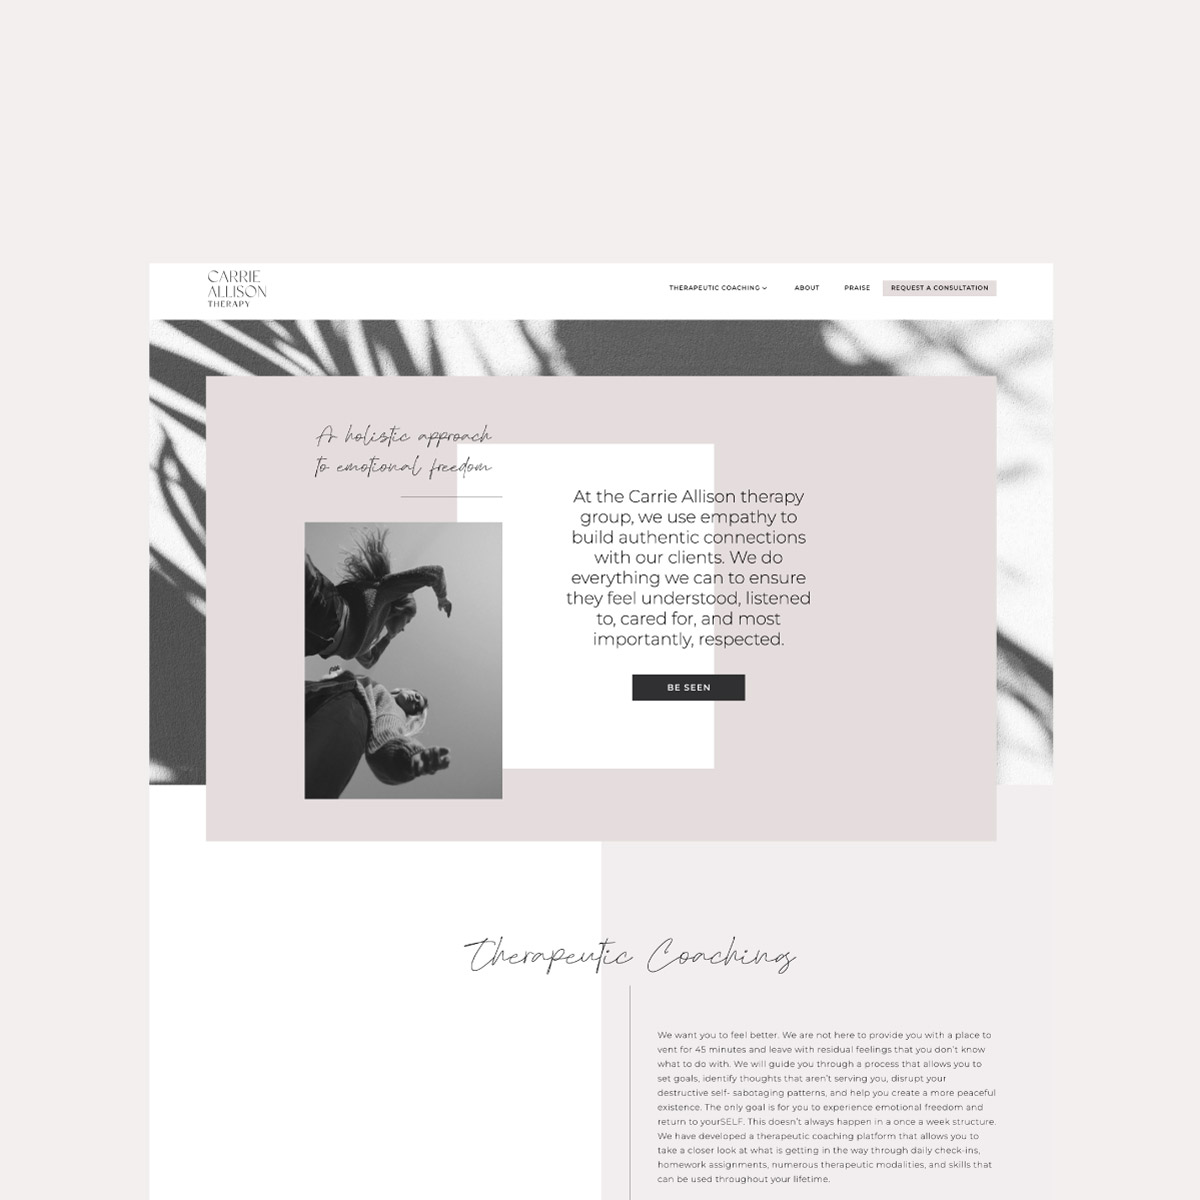 Web design and graphics showcase for Carrie Allison Therapy